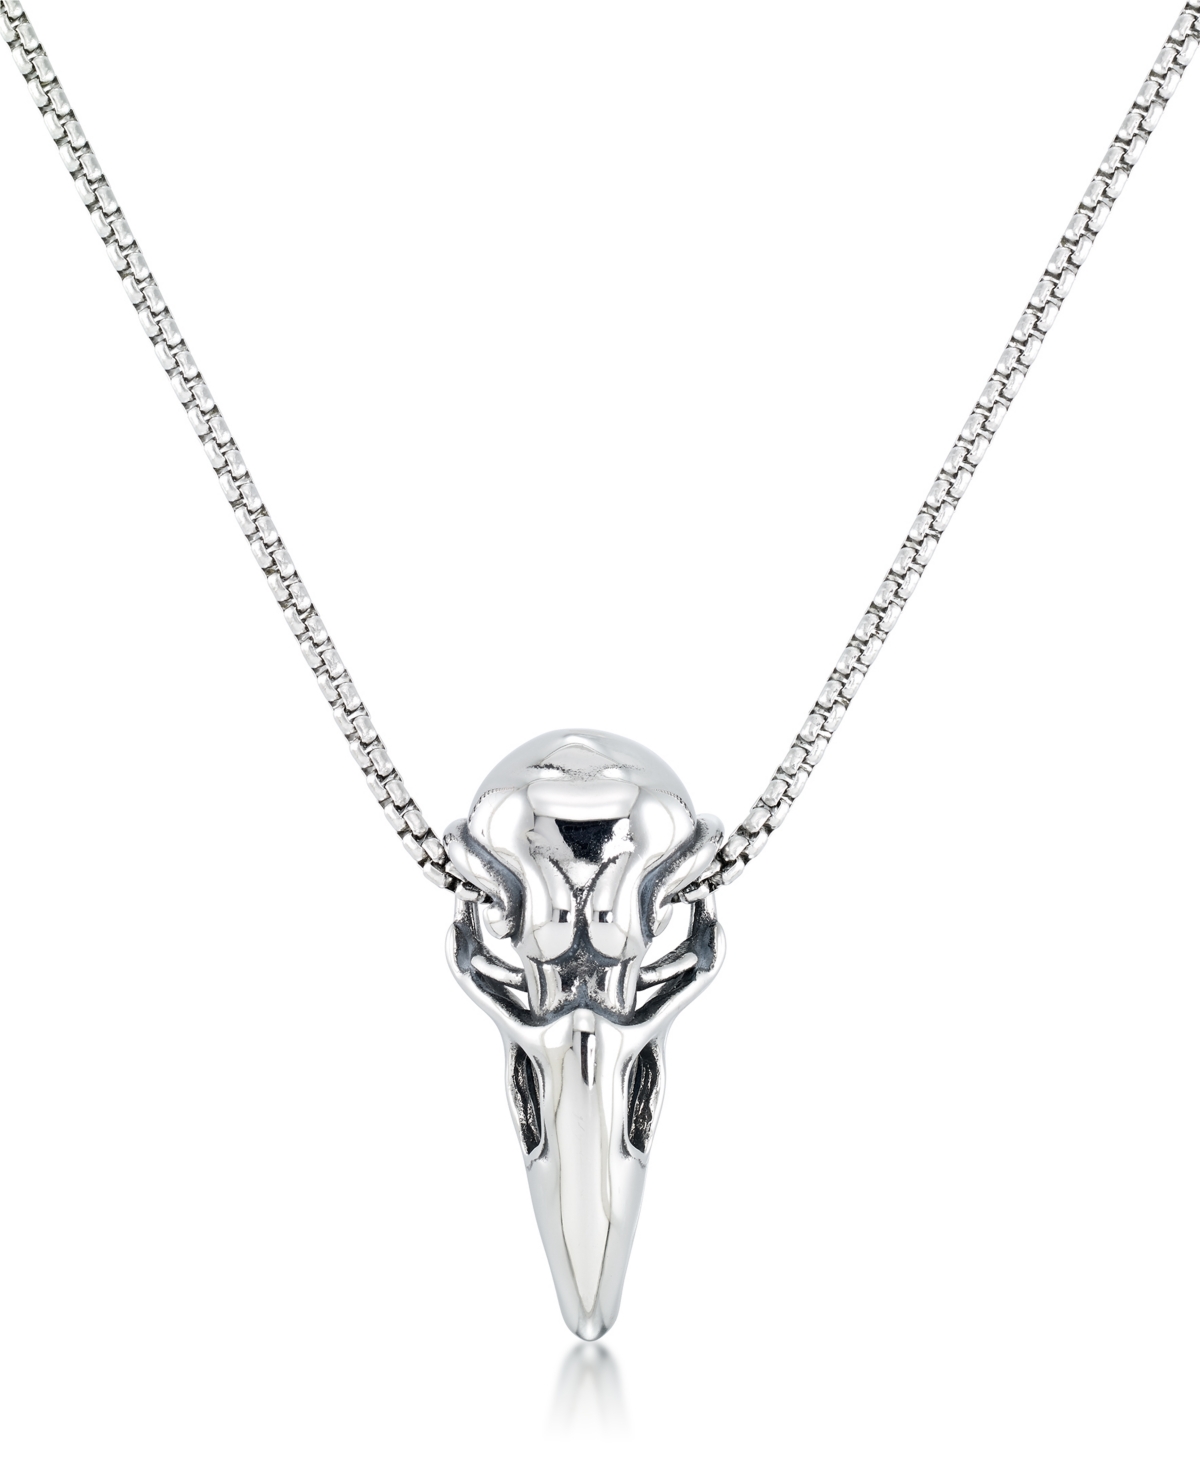 Men's Eagle 24" Pendant Necklace in Stainless Steel - Stainless Steel